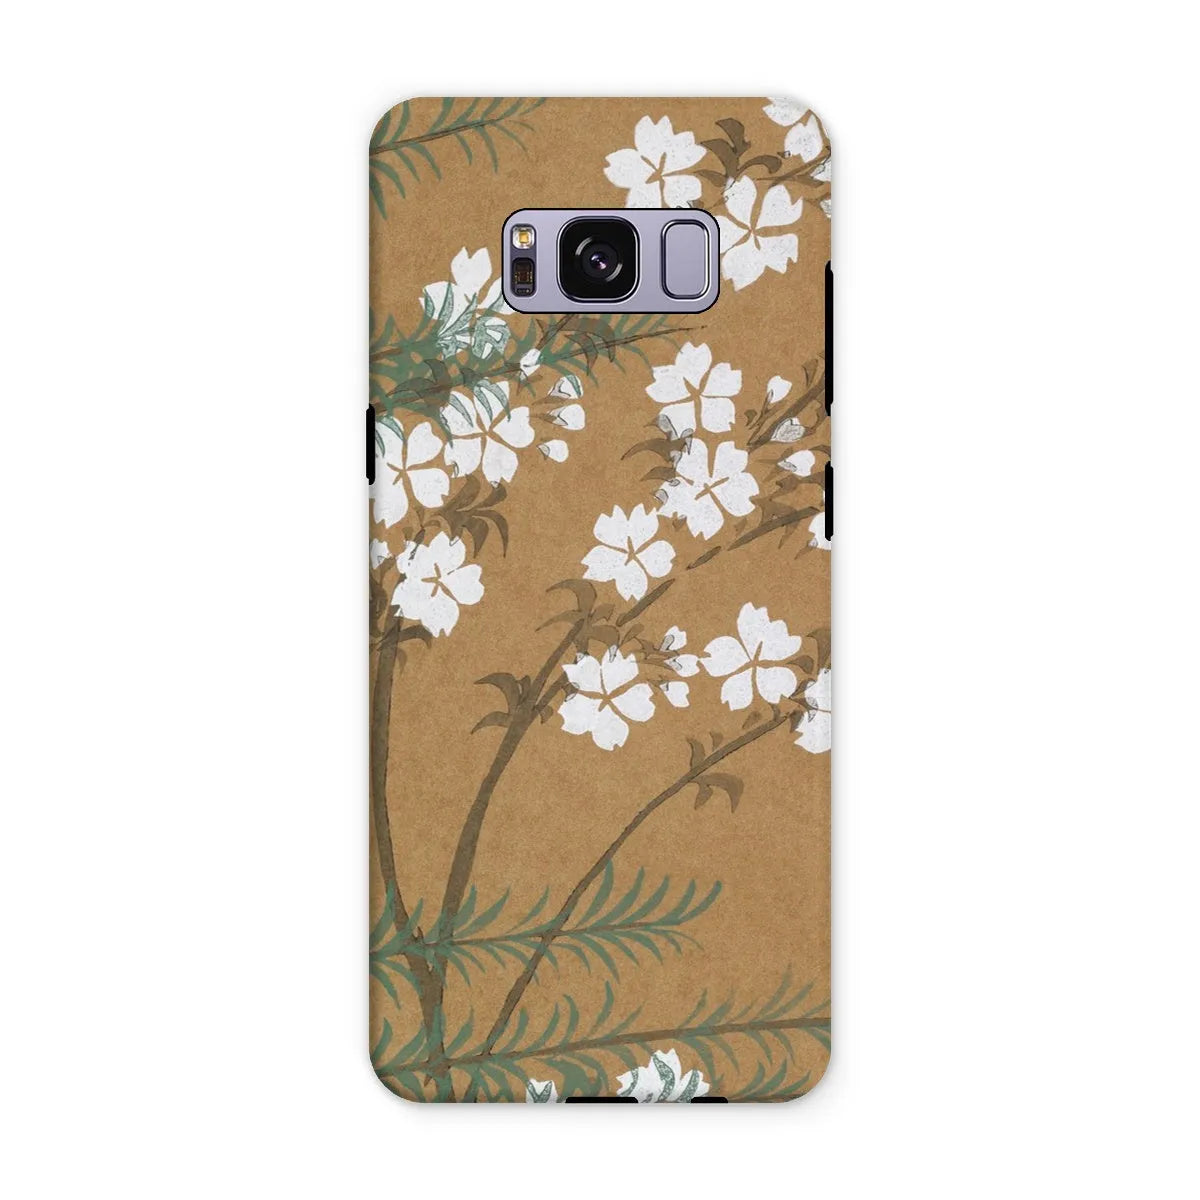 Blossoms From Momoyogusa Floral Phone Case - Kamisaka Sekka - Samsung Galaxy S8 Plus / Matte - Mobile Phone Cases